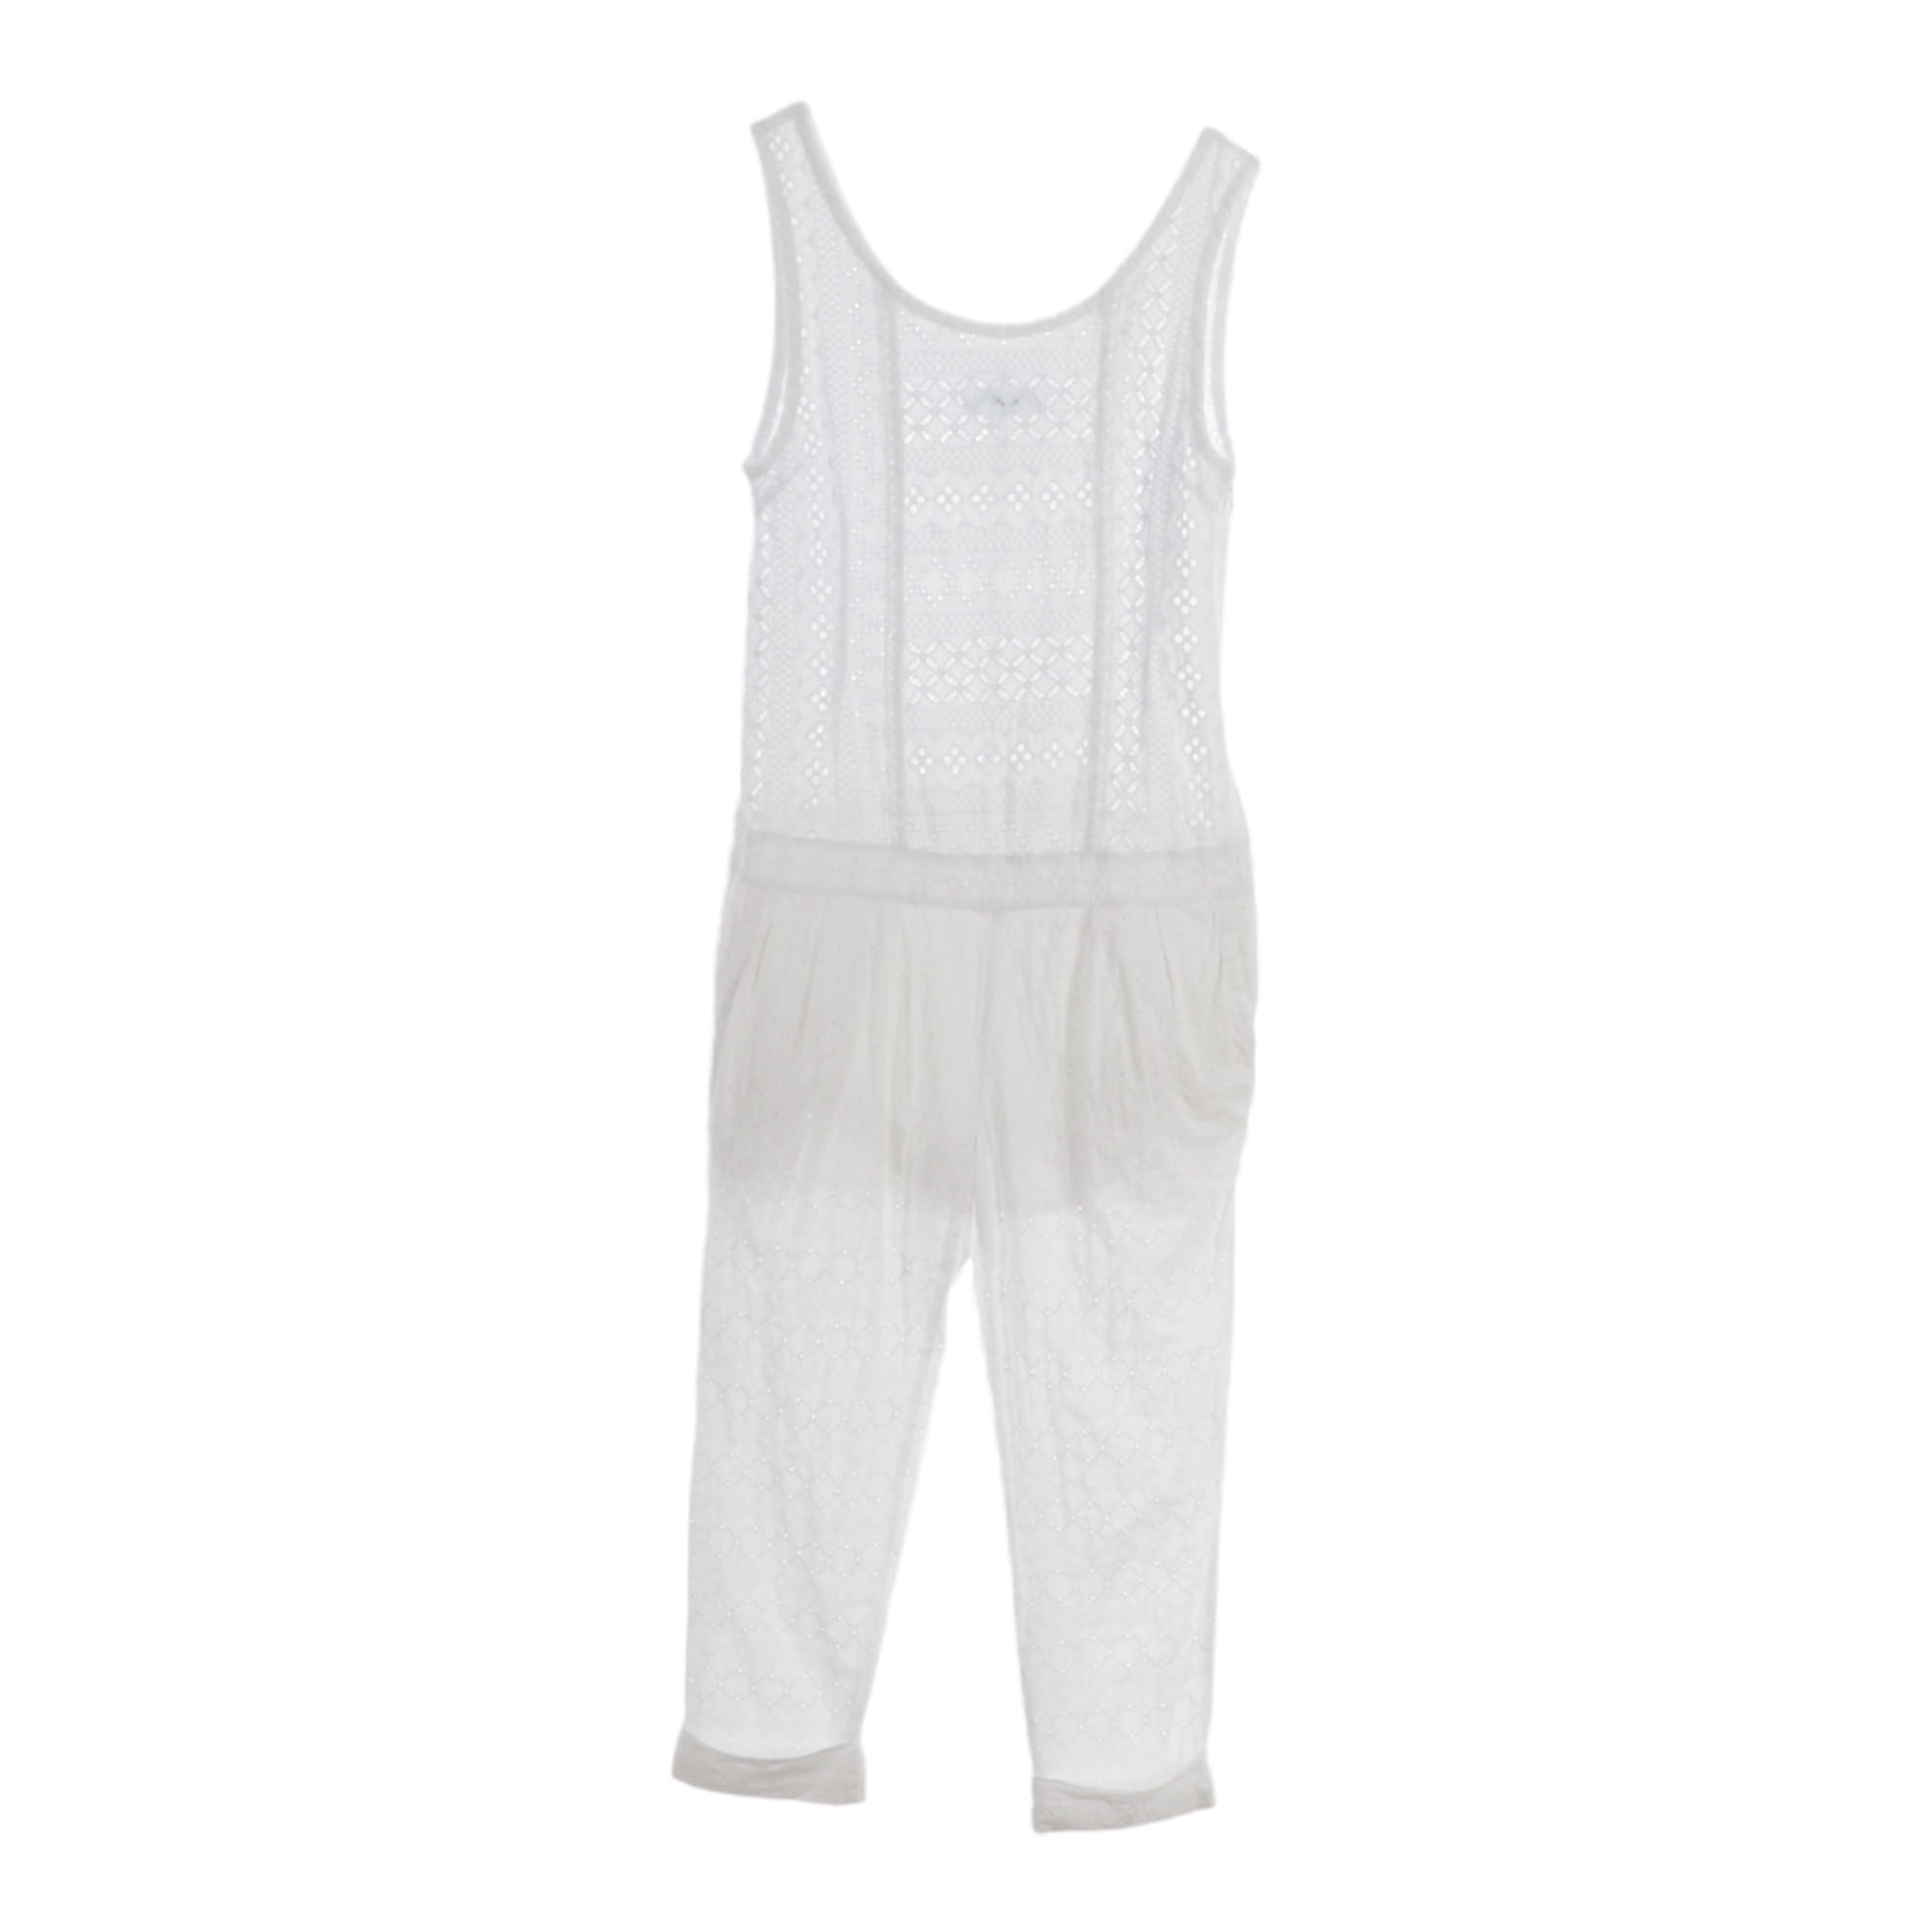 Deicy,Overall/Jumpsuit